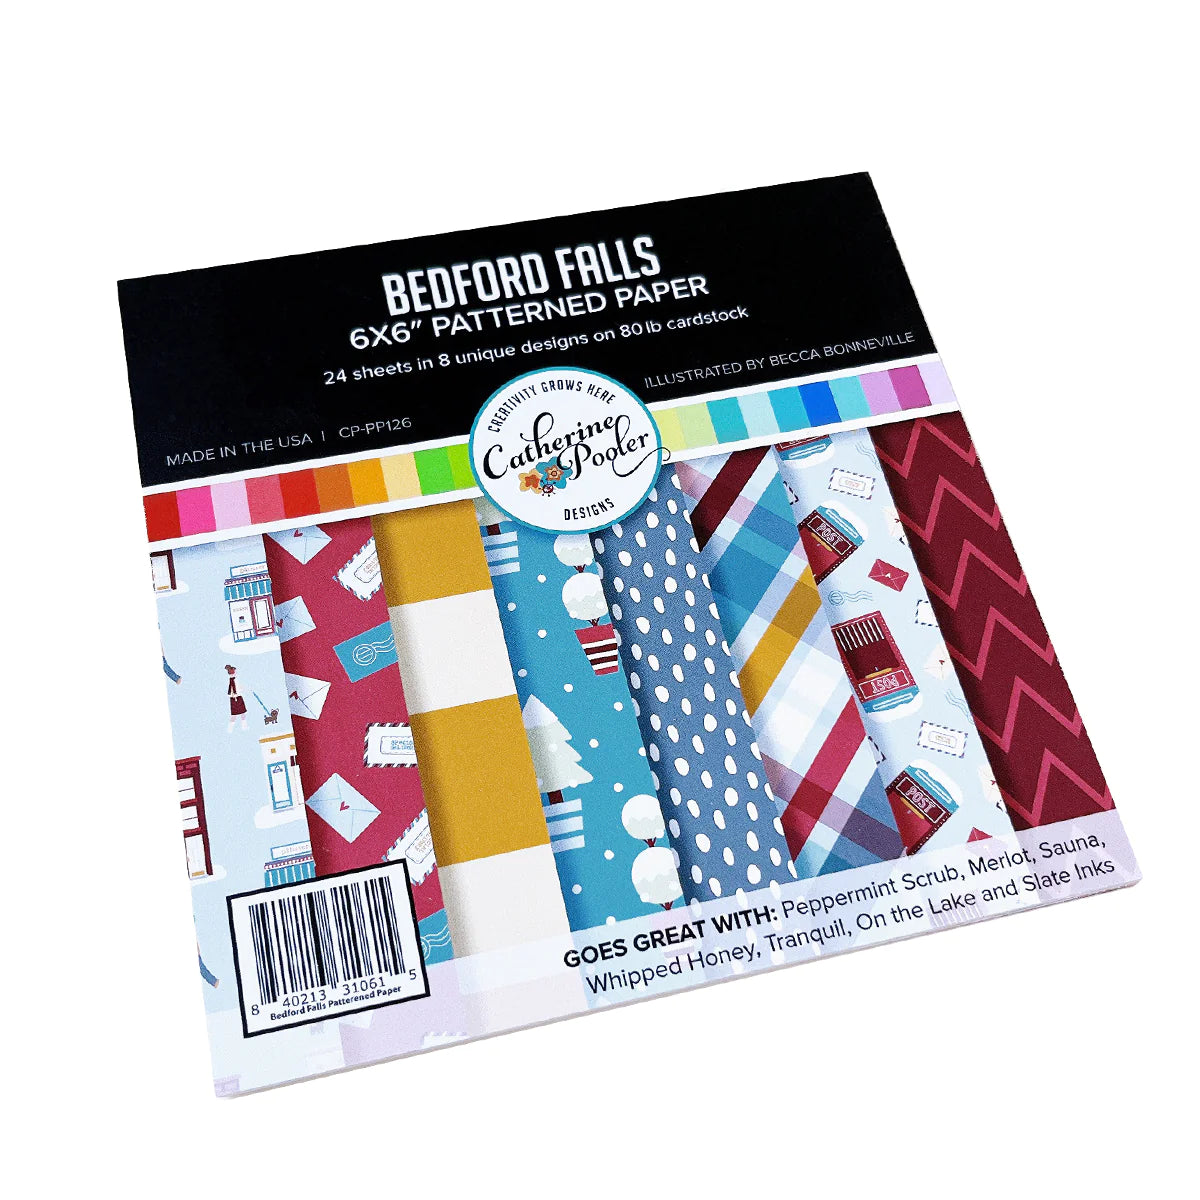 Bedford Falls 6x6 Patterned Paper Pad